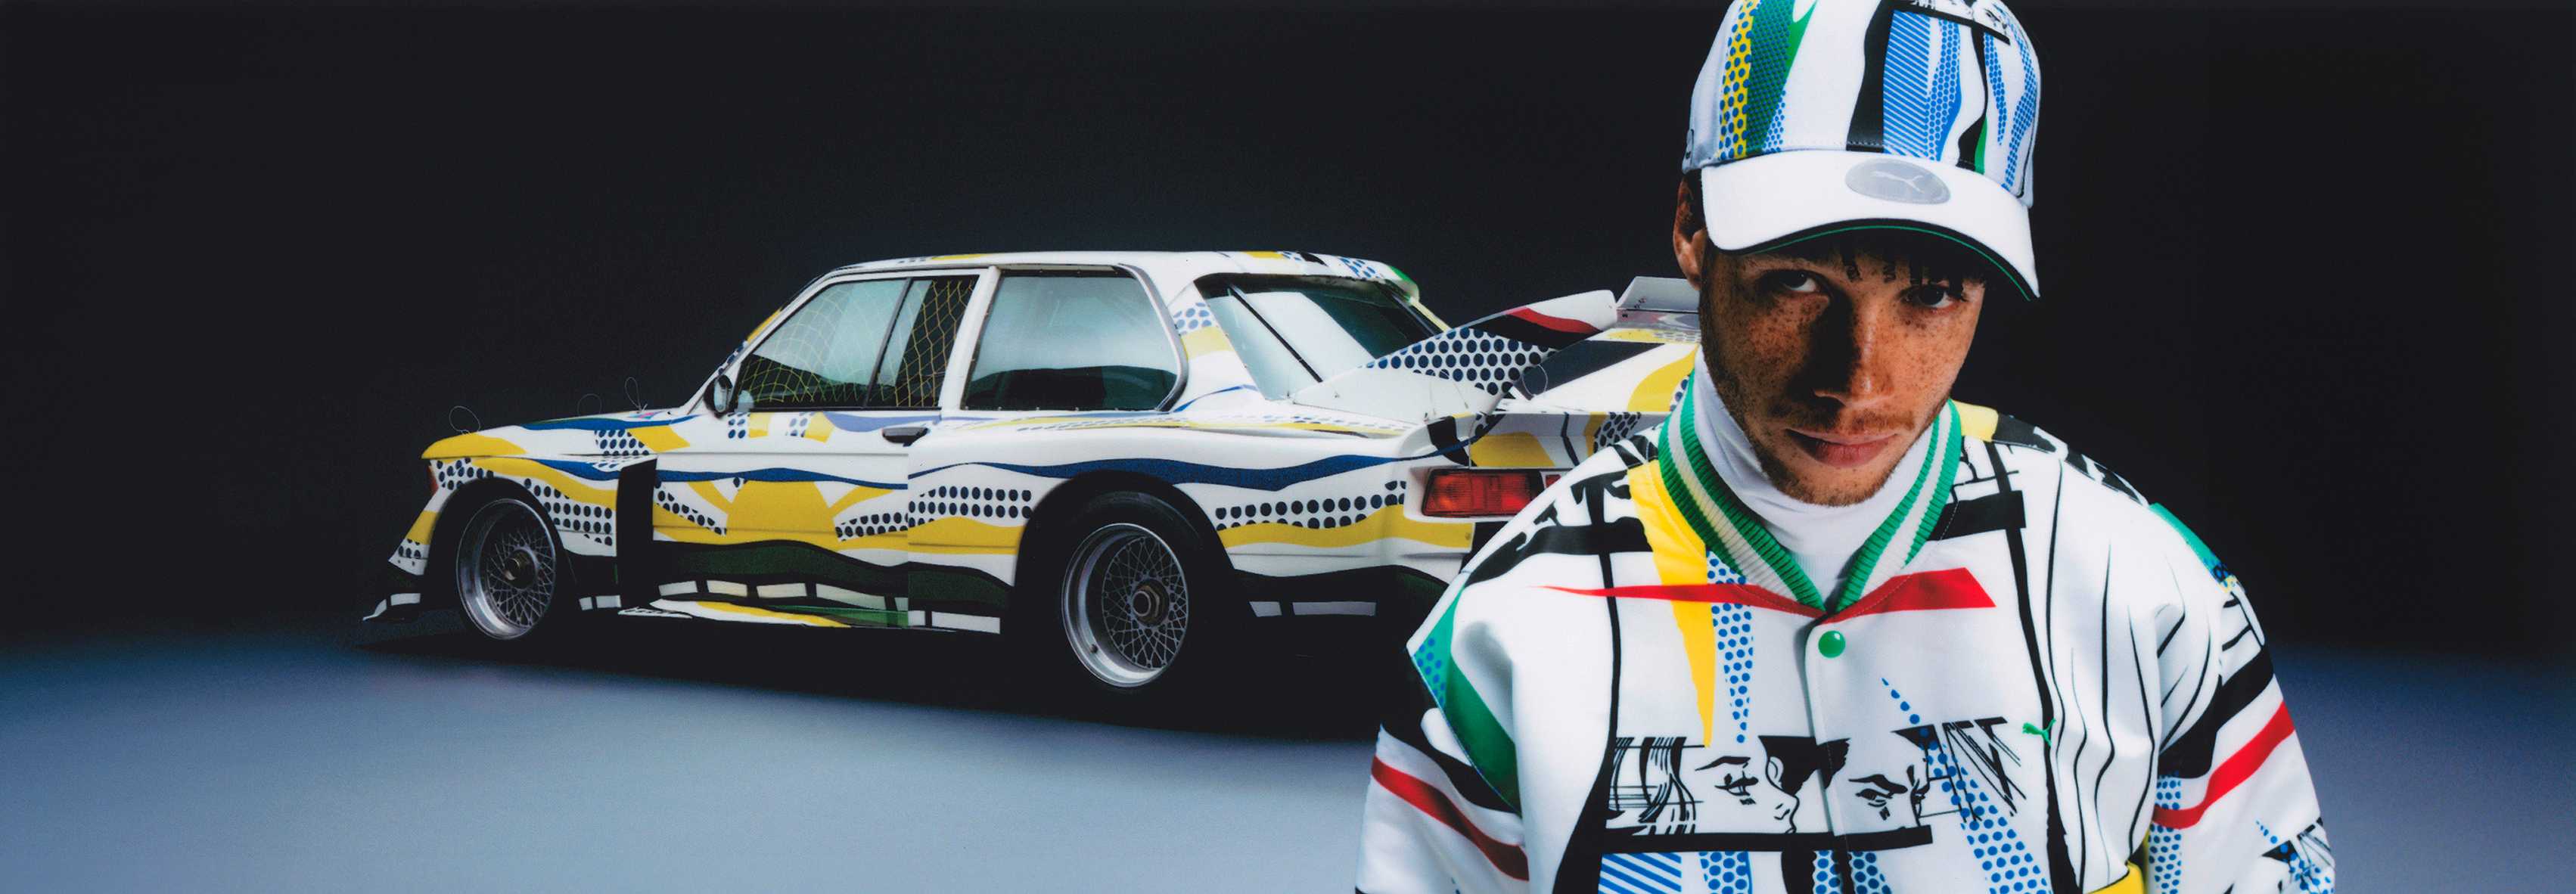 BMW M Motorsport and PUMA present limited-edition BMW Art Car Capsule Collection inspired by Roy Lichtenstein.